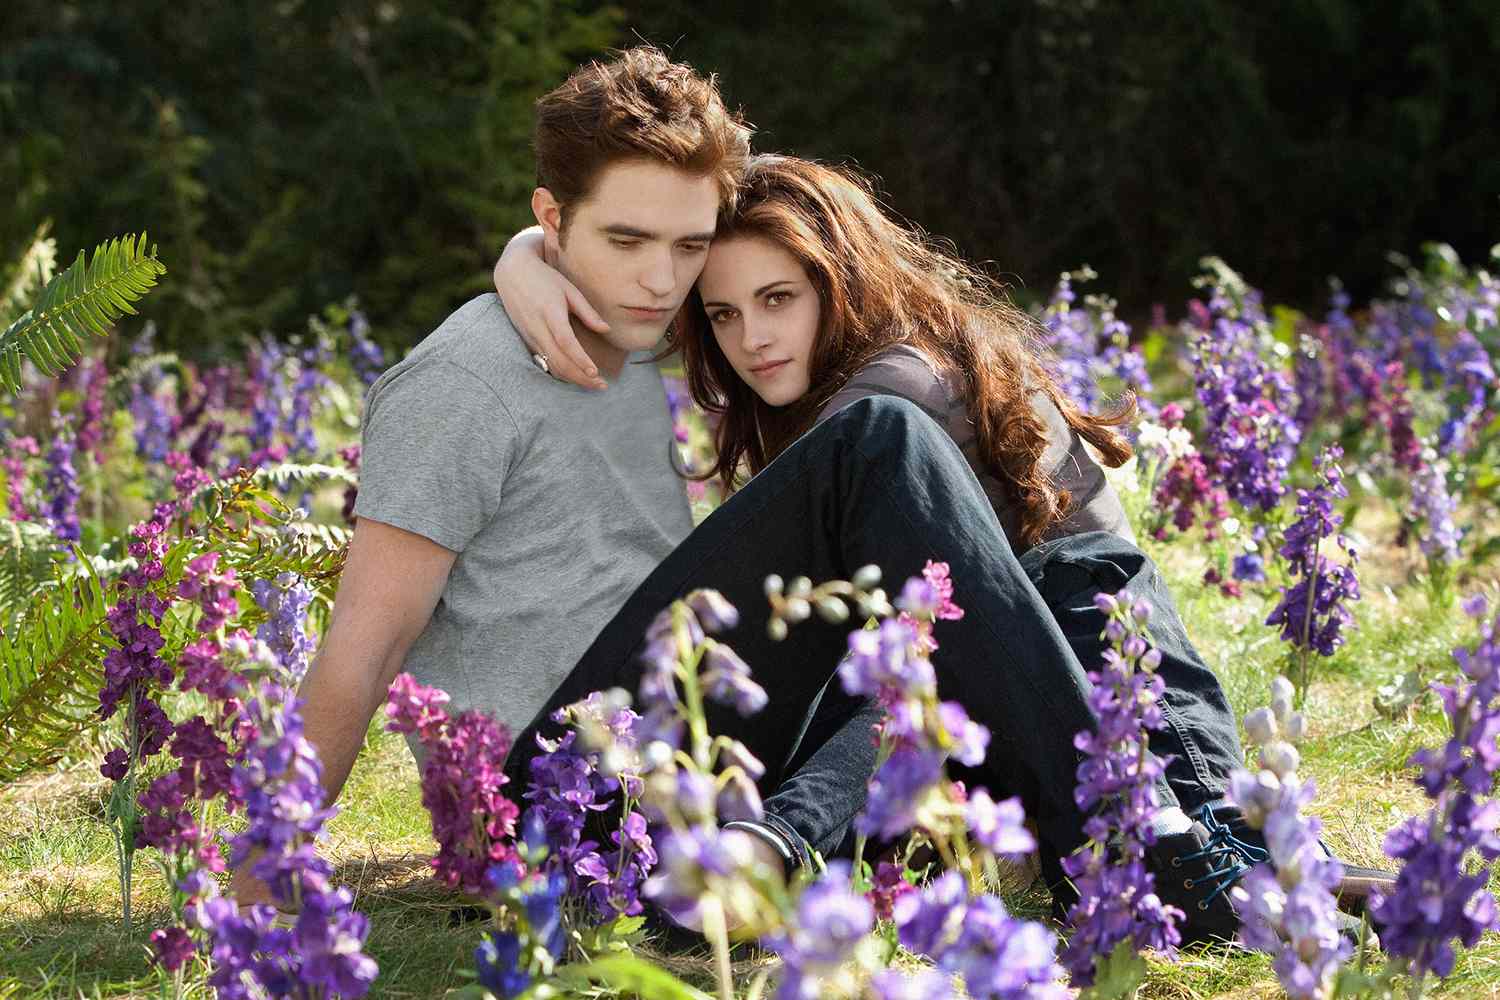 bonbryan abantao recommends twilight movies free downloads pic